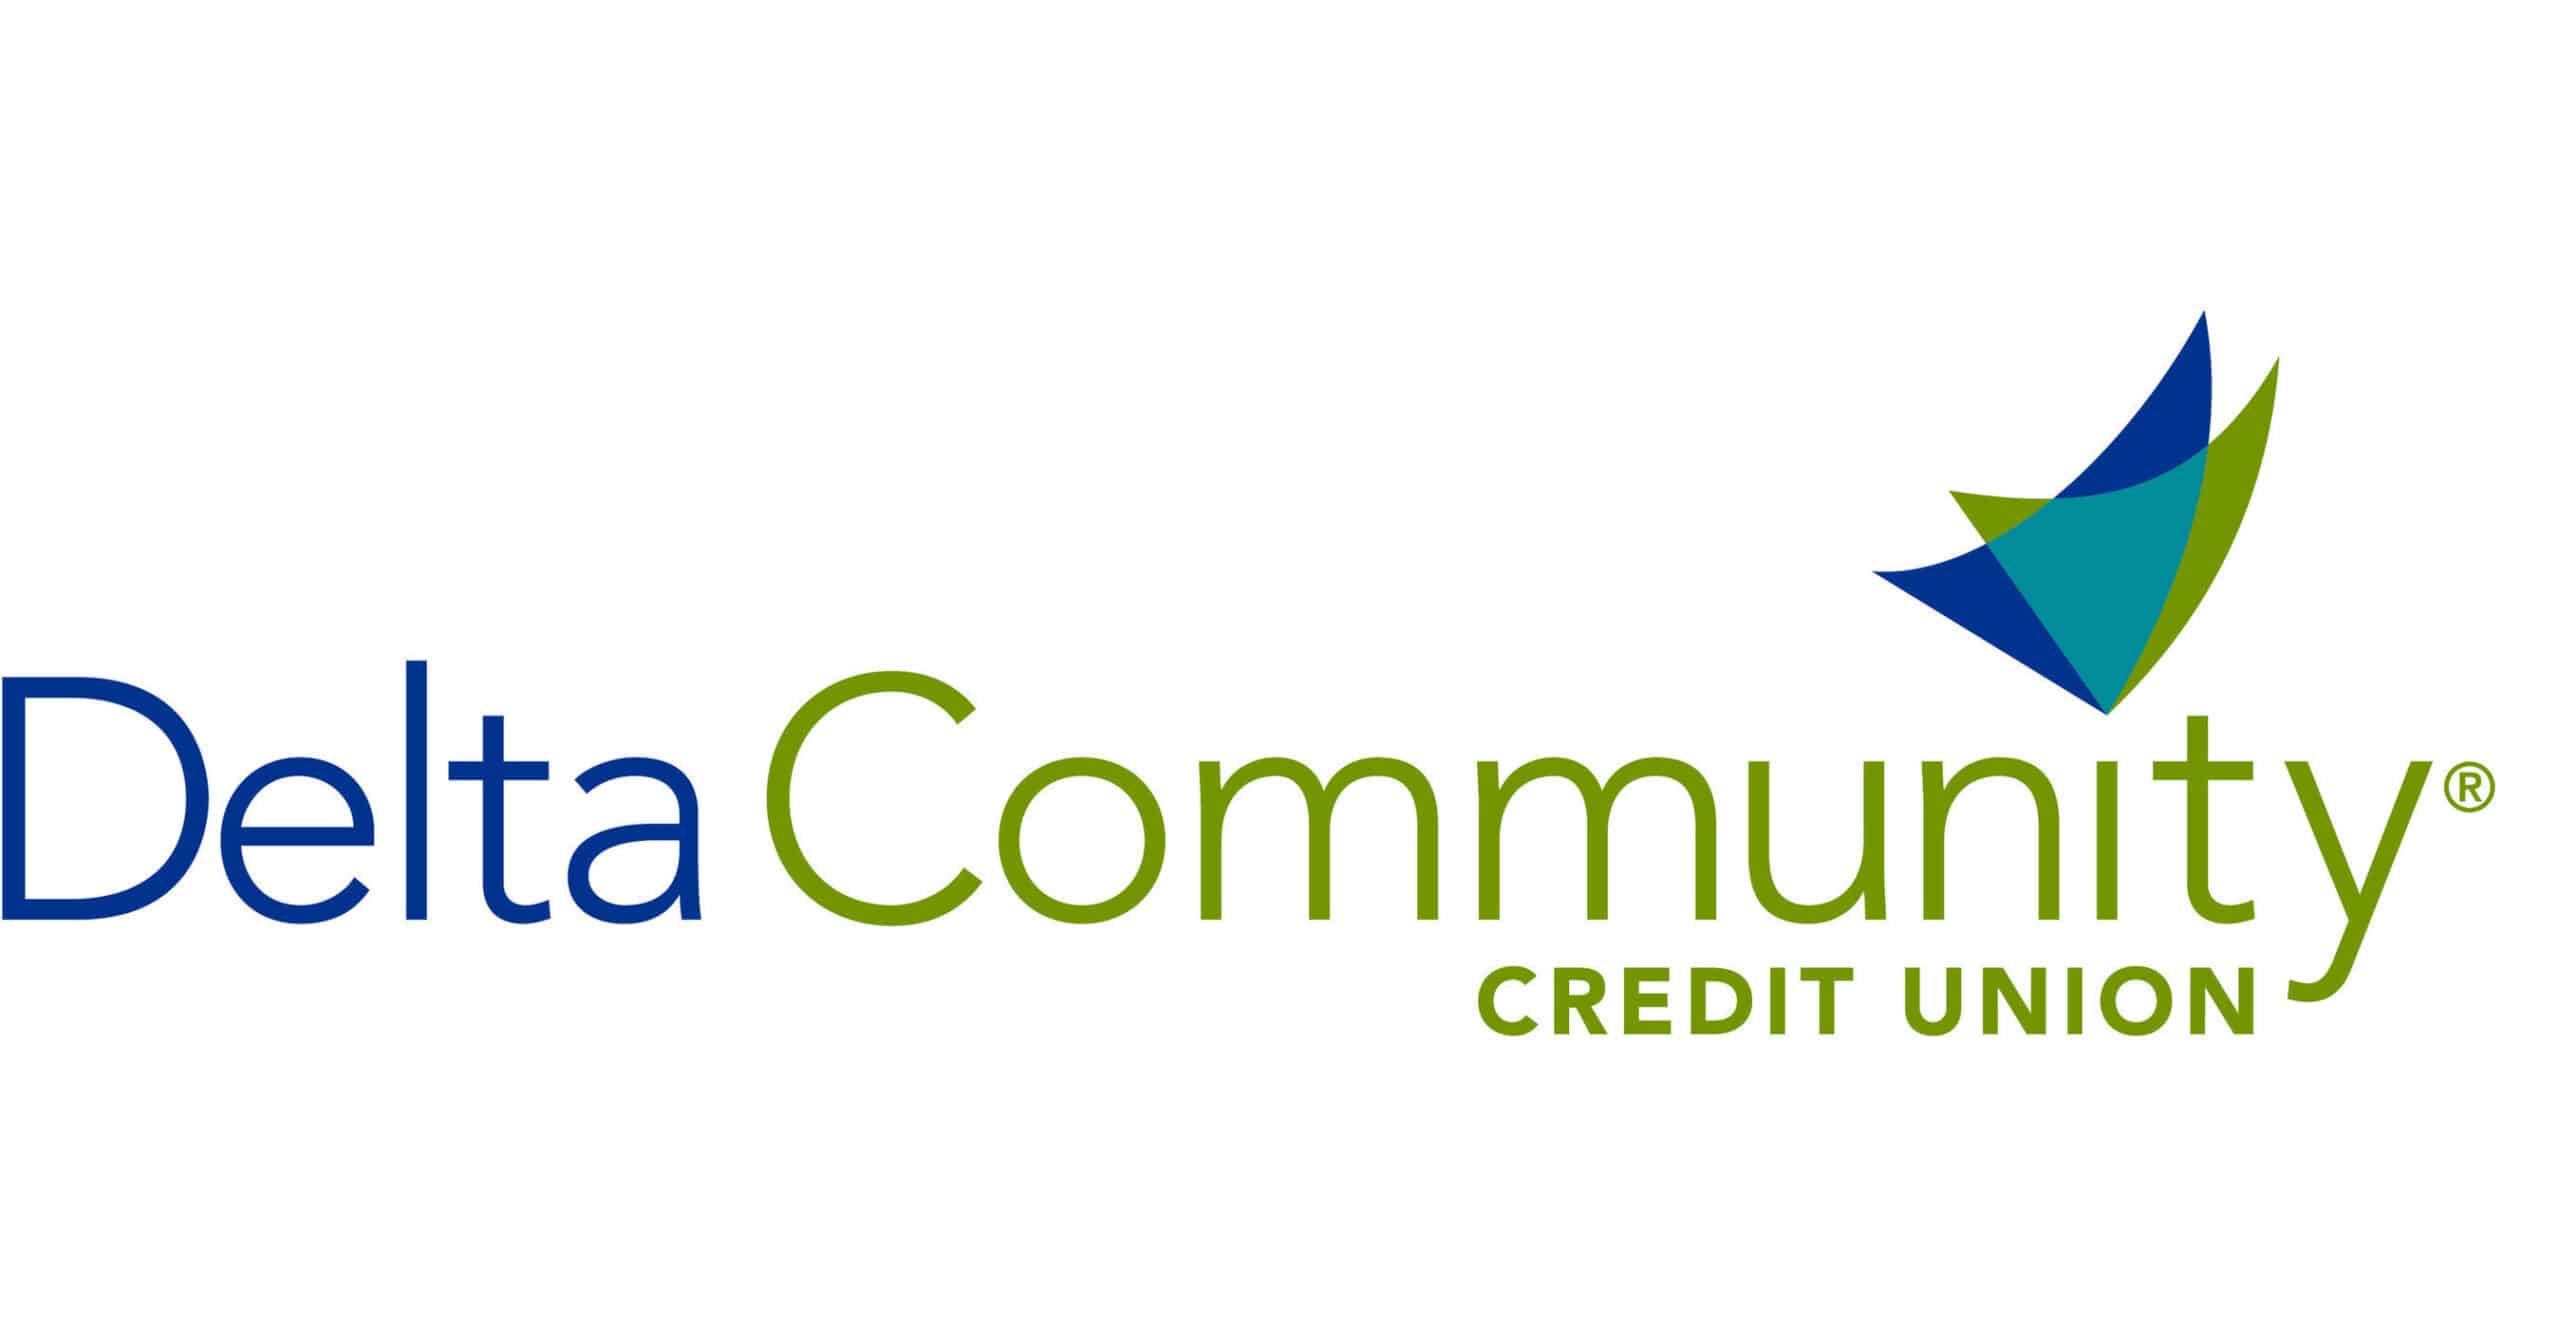 Delta Community Credit Union. Everything your bank should be. (PRNewsFoto/Delta Community Credit Union)